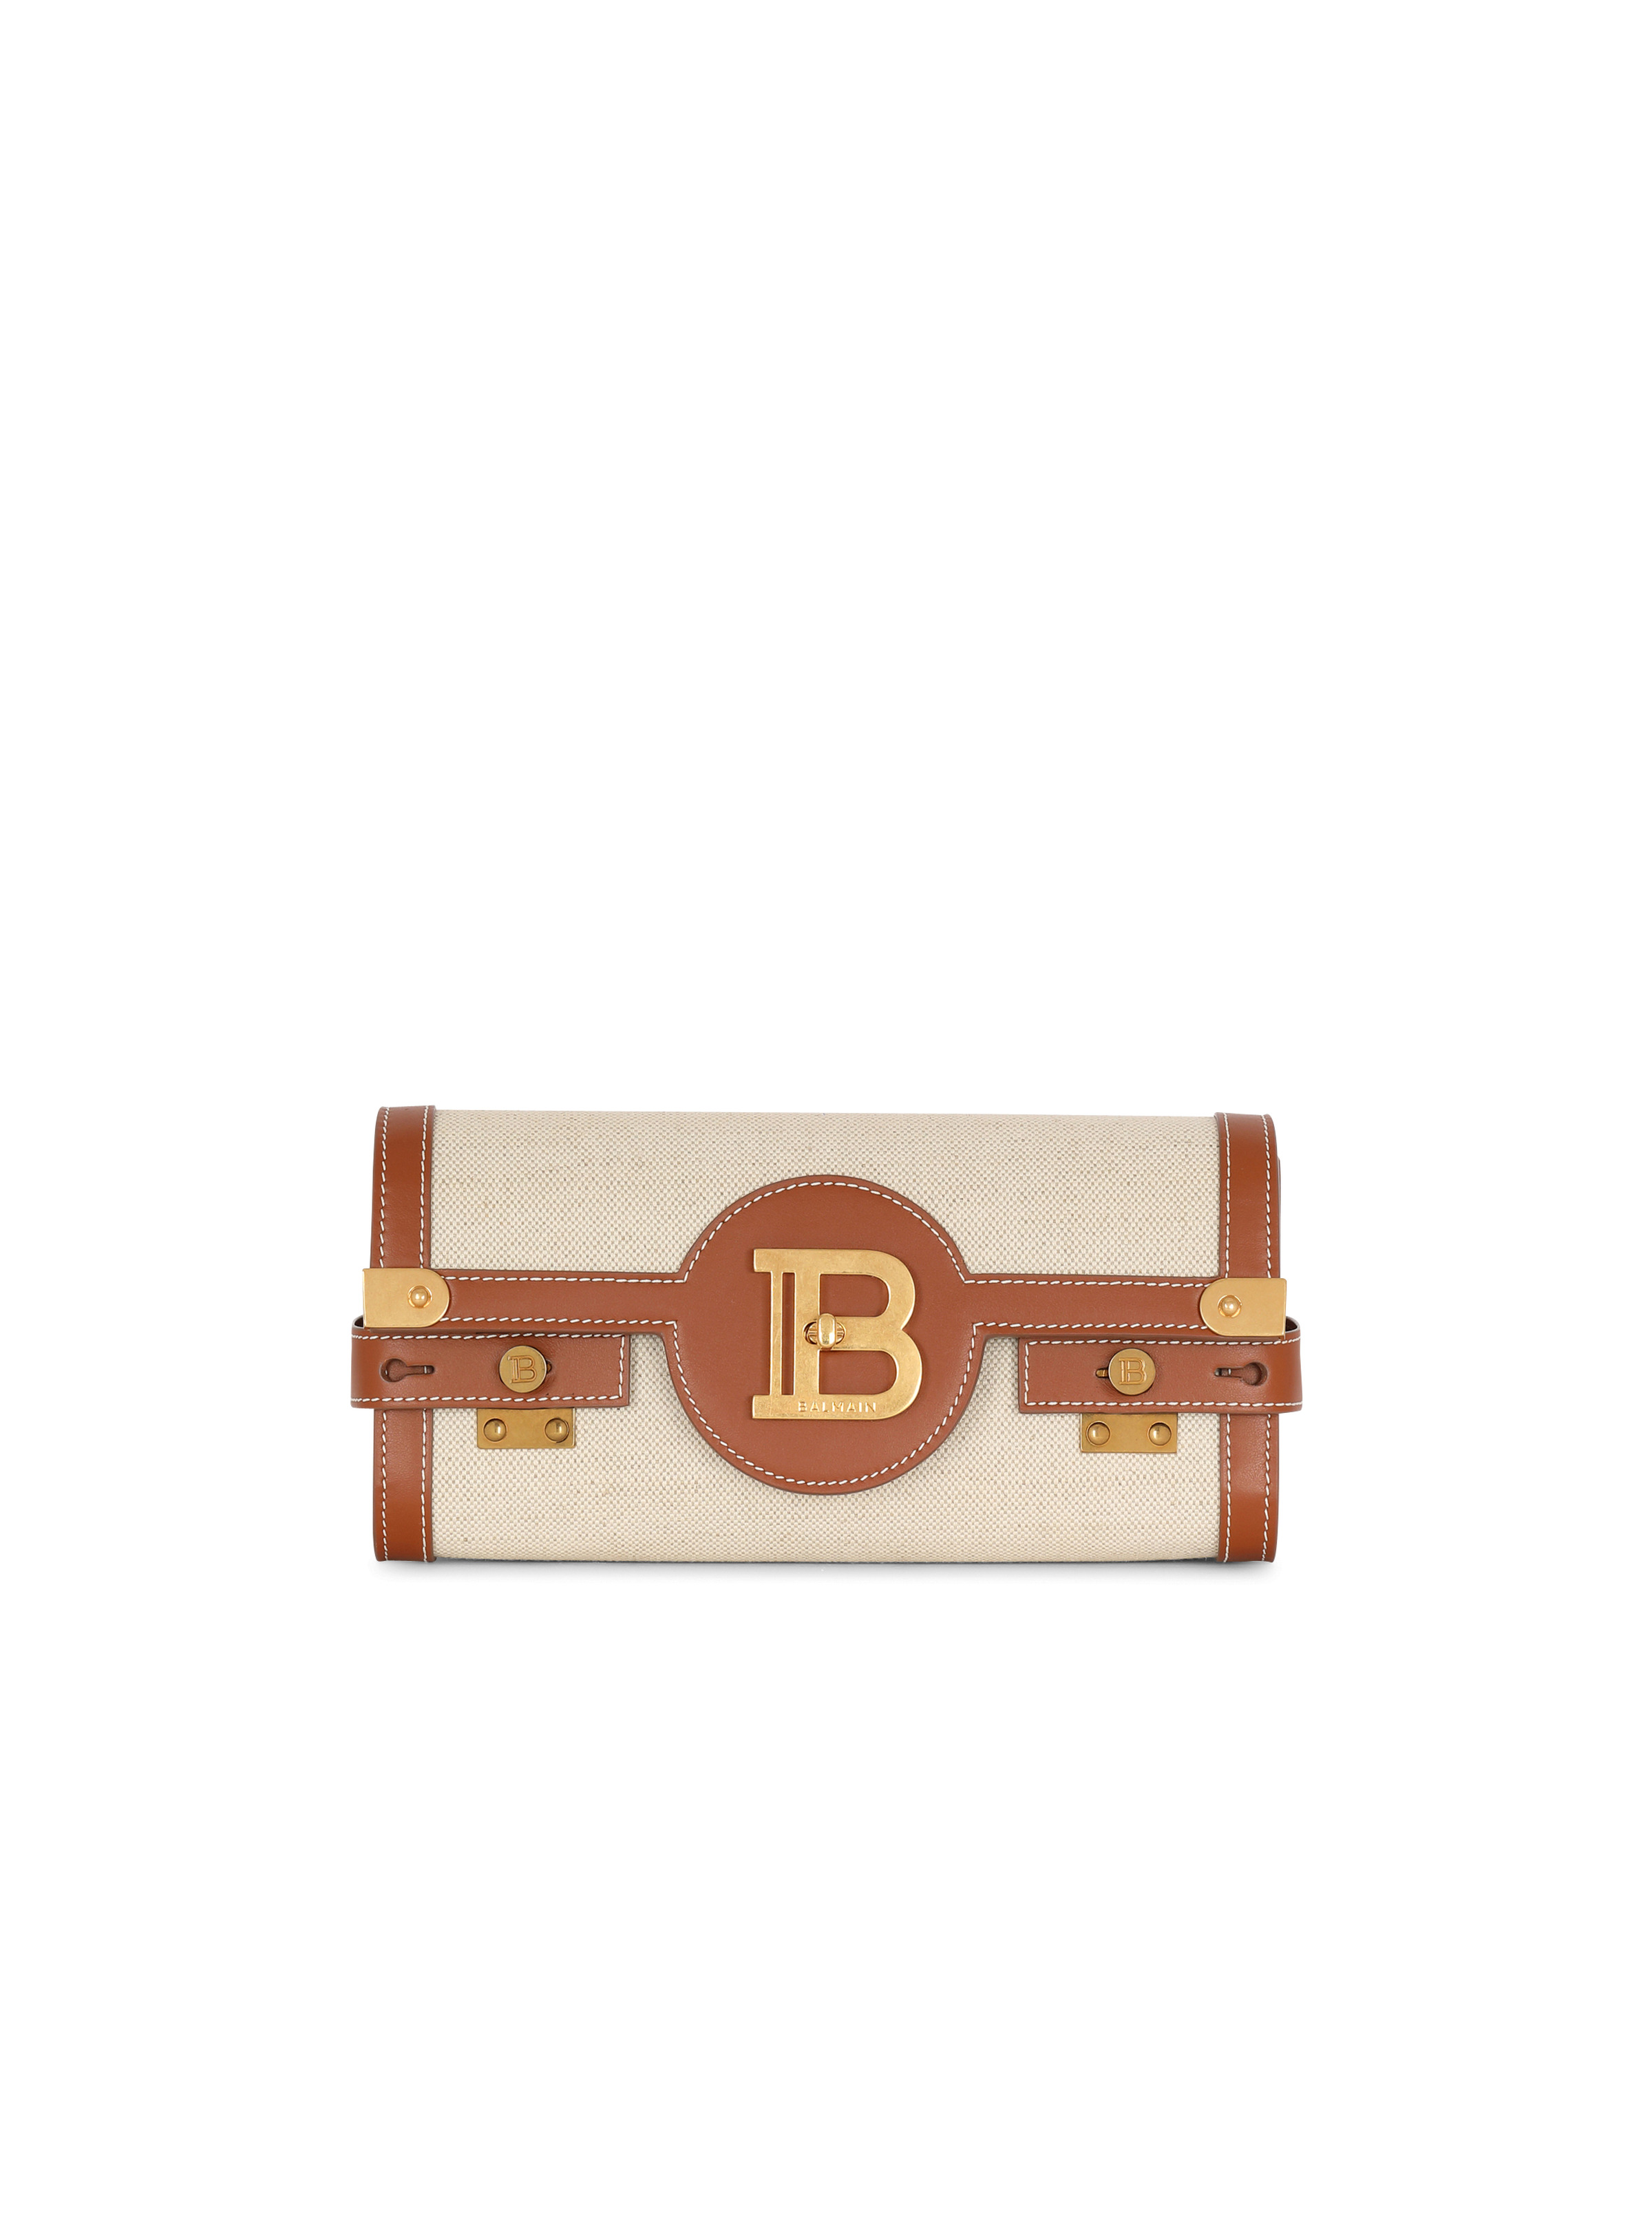 B-Buzz 23 leather and canvas clutch bag - 1